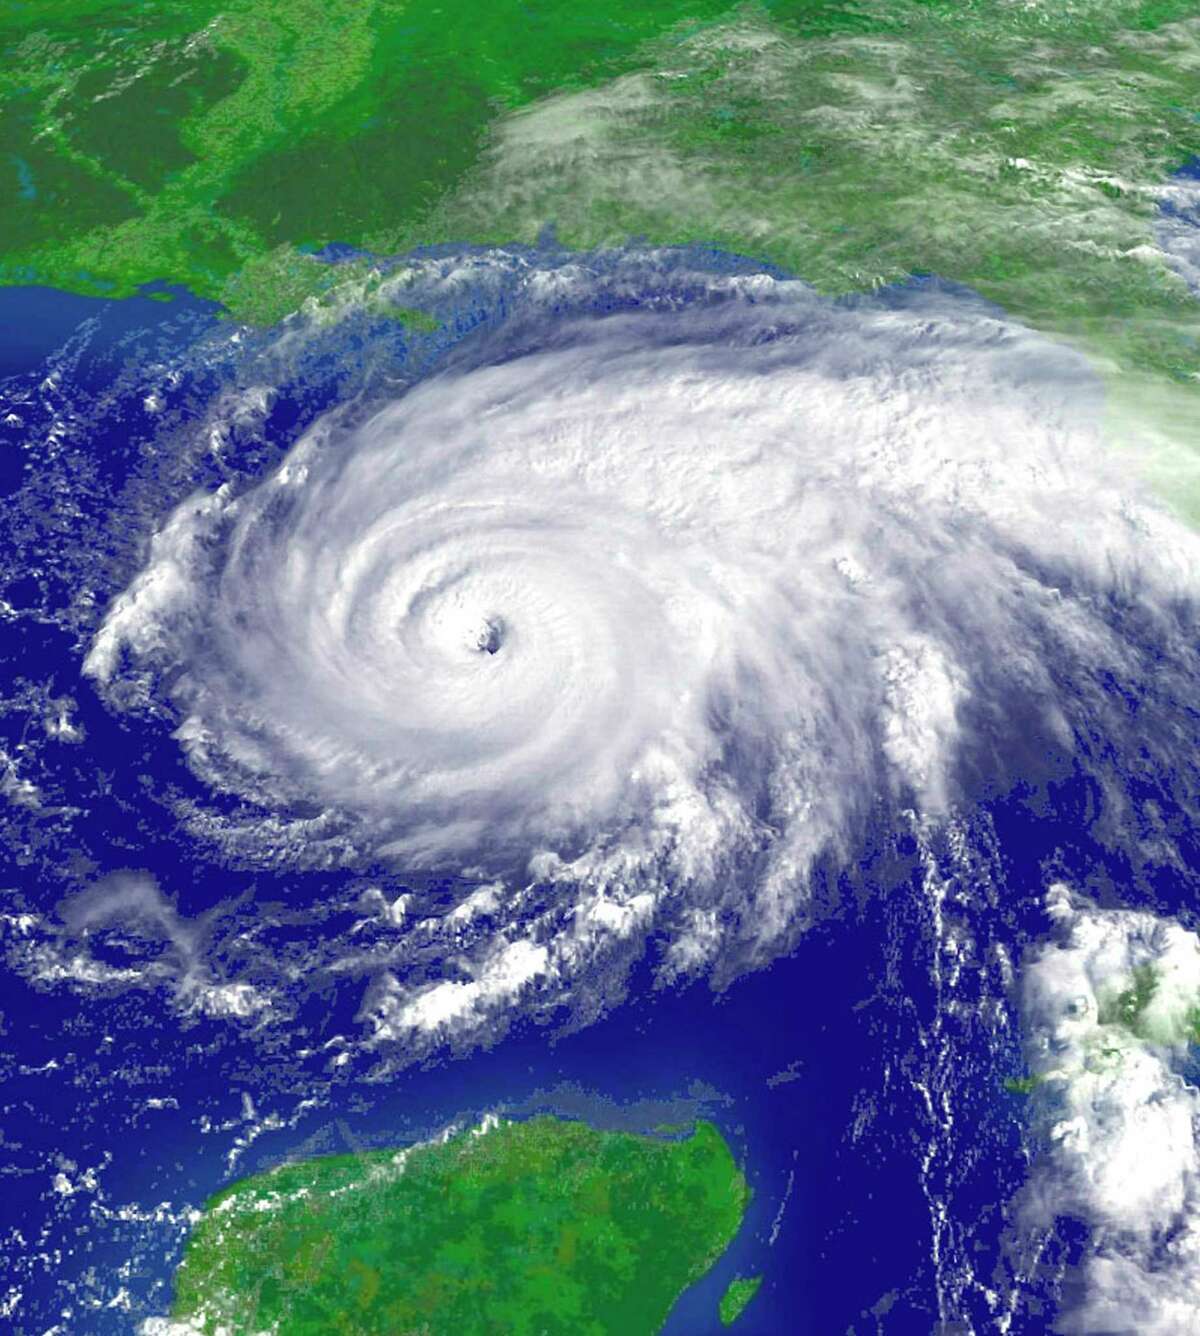 National Oceanic and Atmospheric Administration satellite image of Hurricane Rita taken as the dangerous storm moves through the Gulf of Mexico and headed for a rendezvous with the U.S. Gulf Coast, September 22, 2005. 